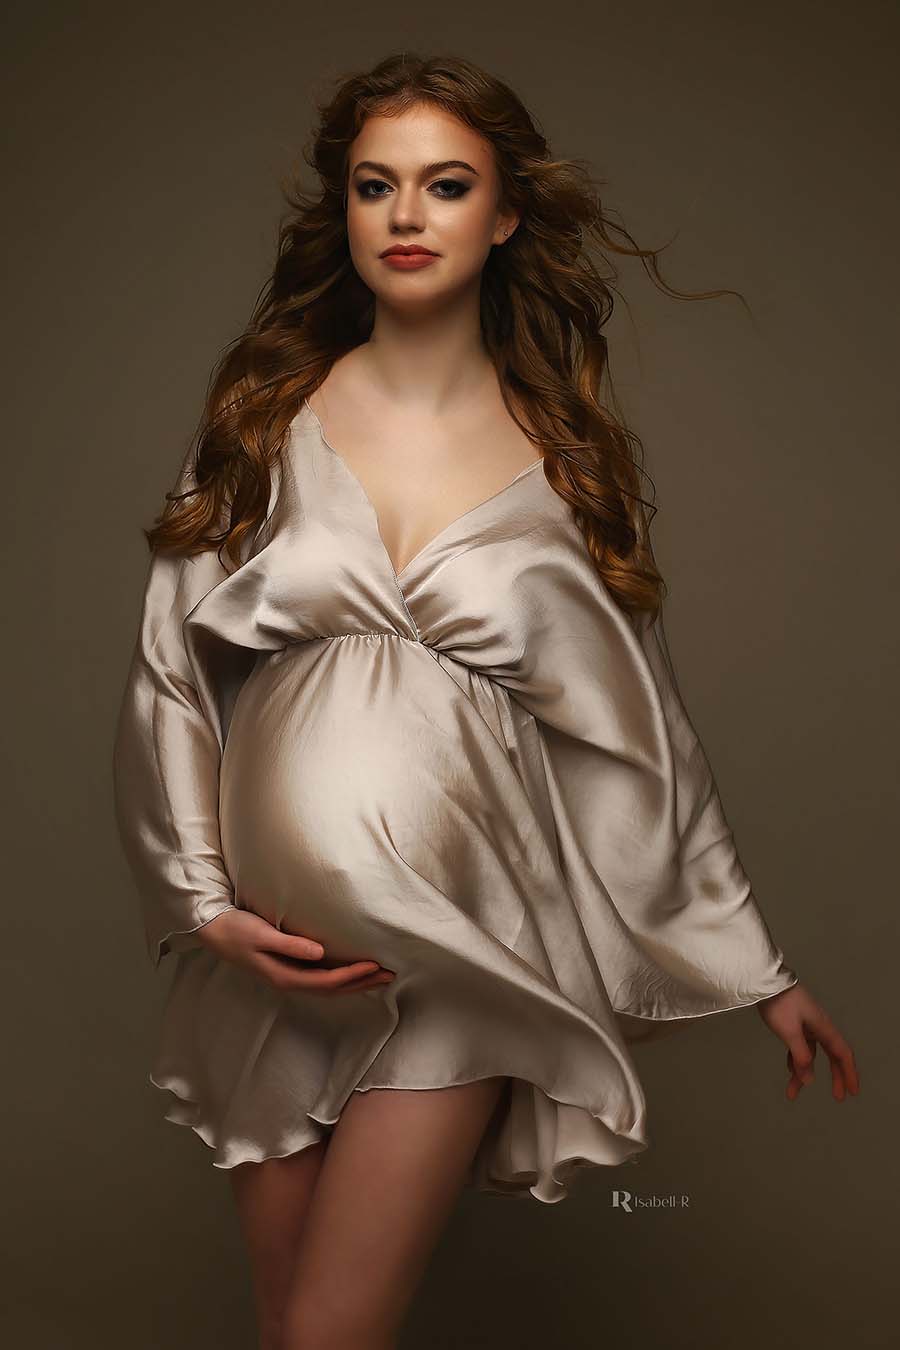 pregnant model poses wearing a sand short dress made of satin. the dress has a low v cut neckline and kaftan style sleeves.